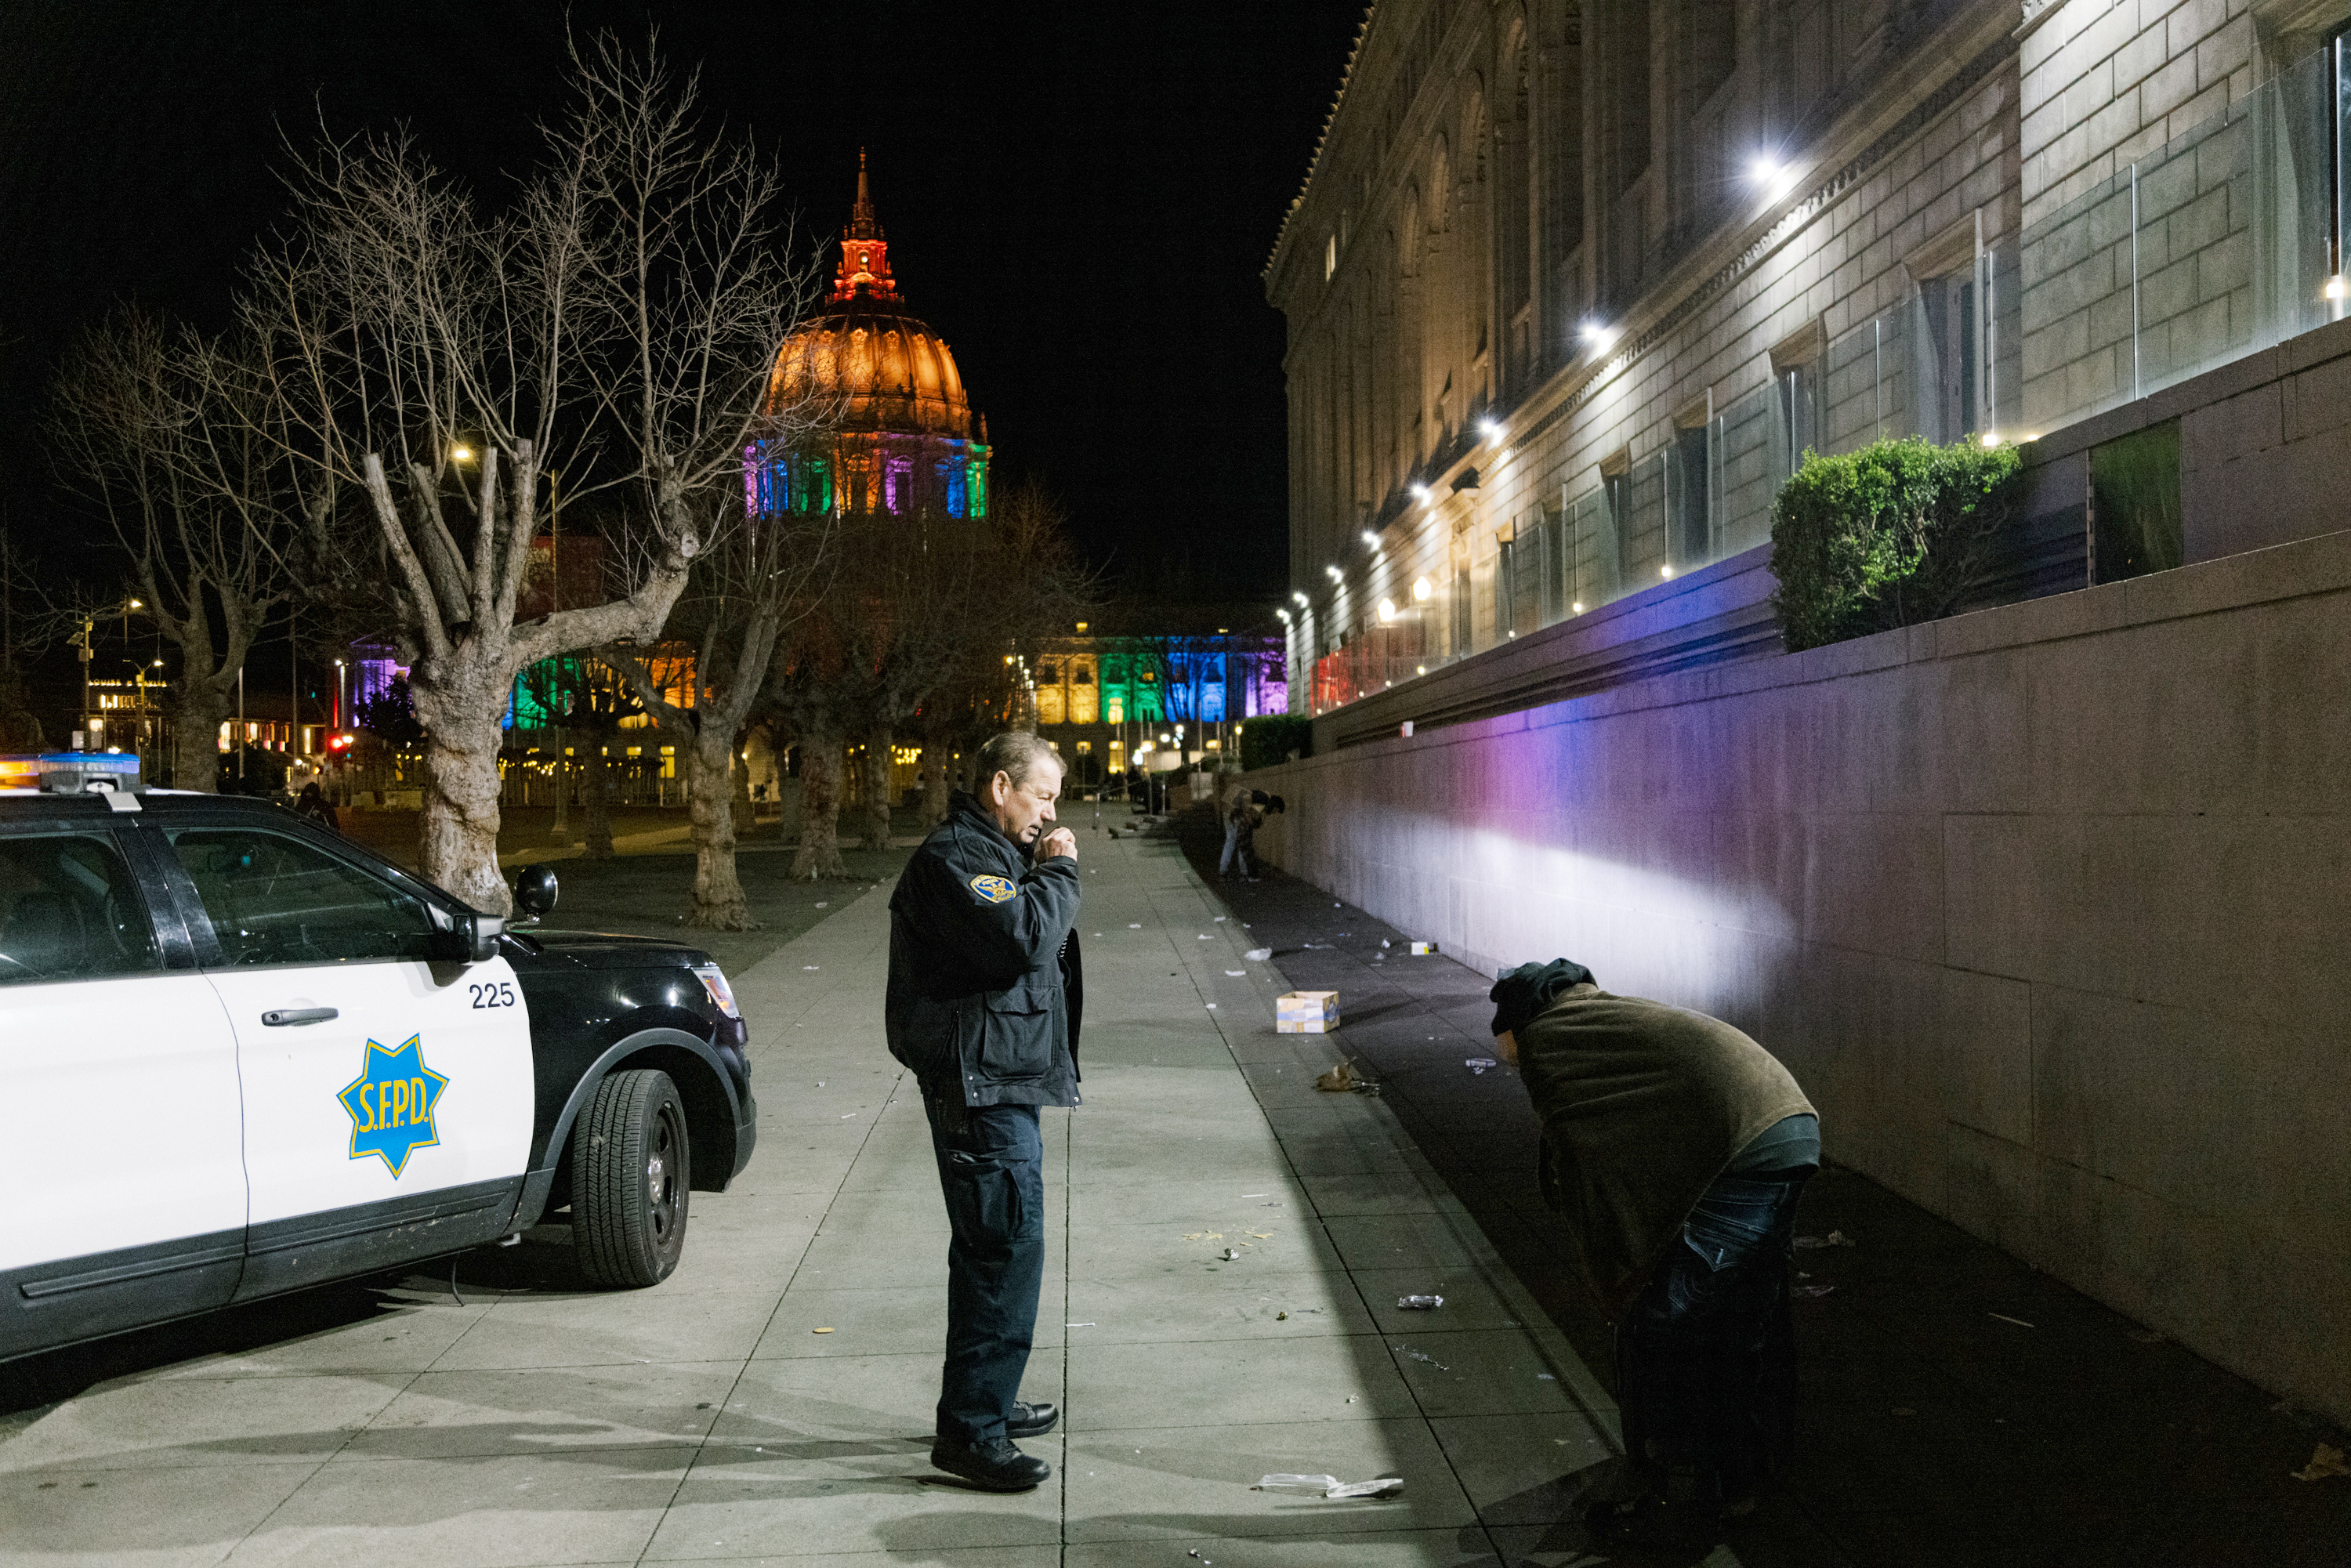 A police officer stands by his car as another person leans against a lit-up wall at night, with a dome building in the background.